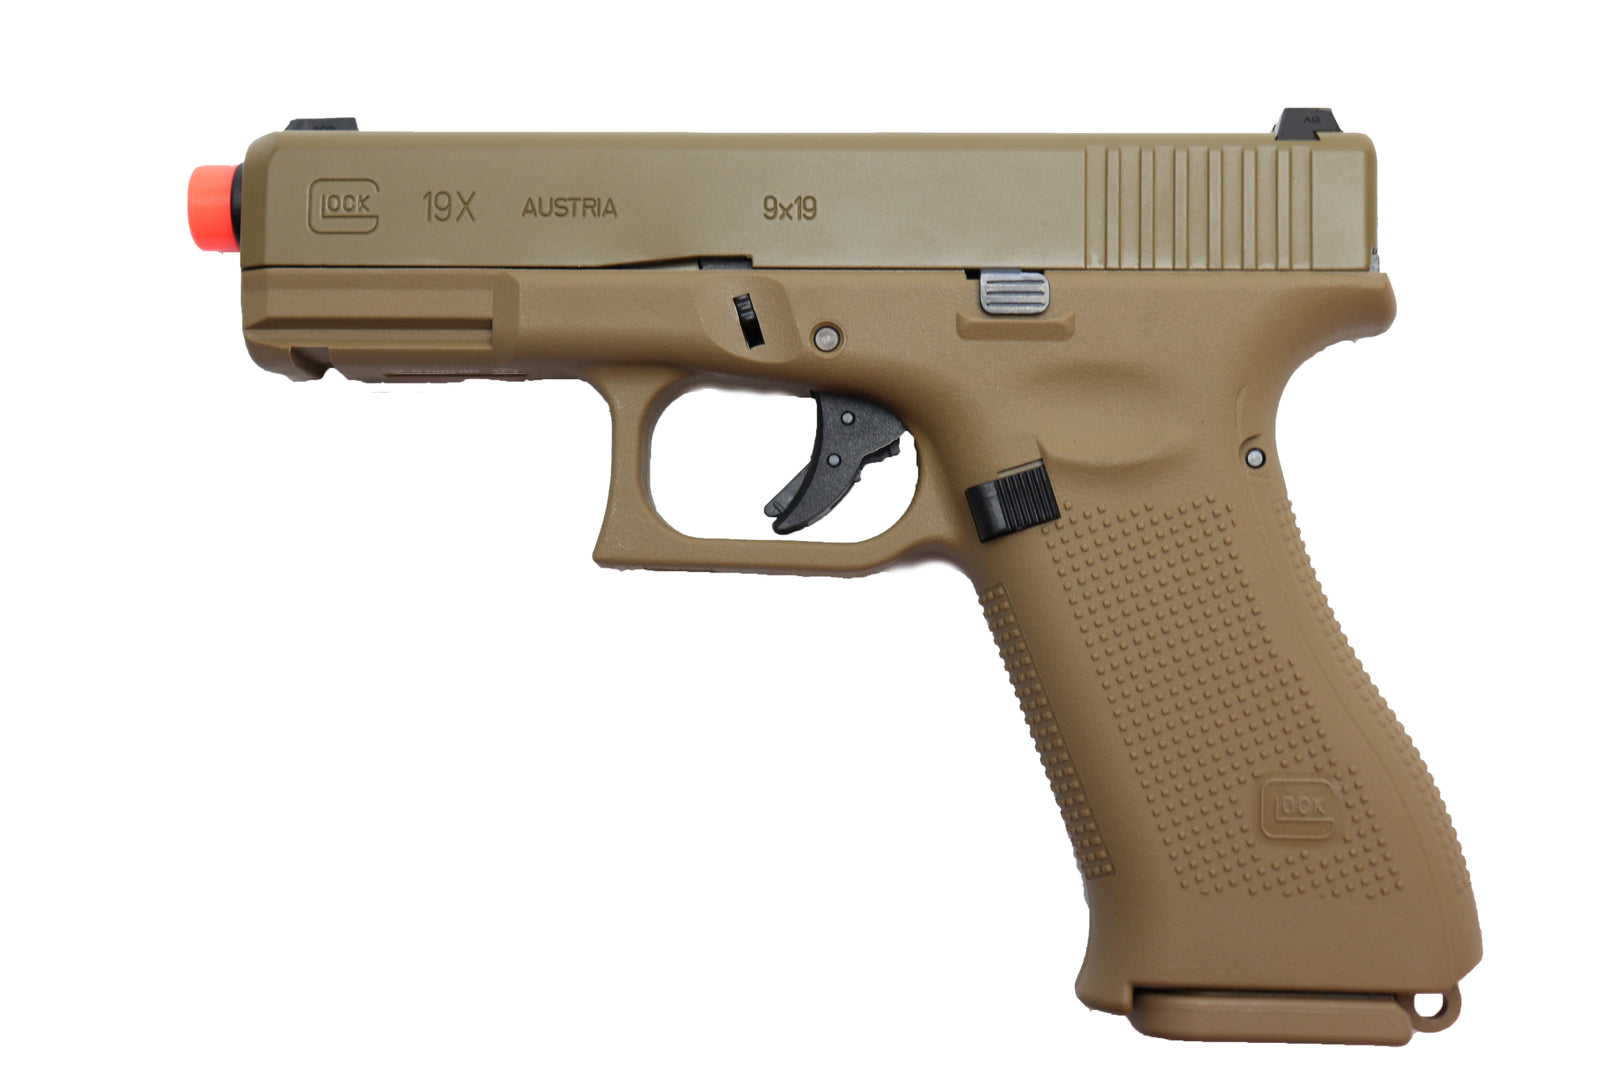 Elite Force Fully Licensed GLOCK 19X Gas Blowback Airsoft Pistol